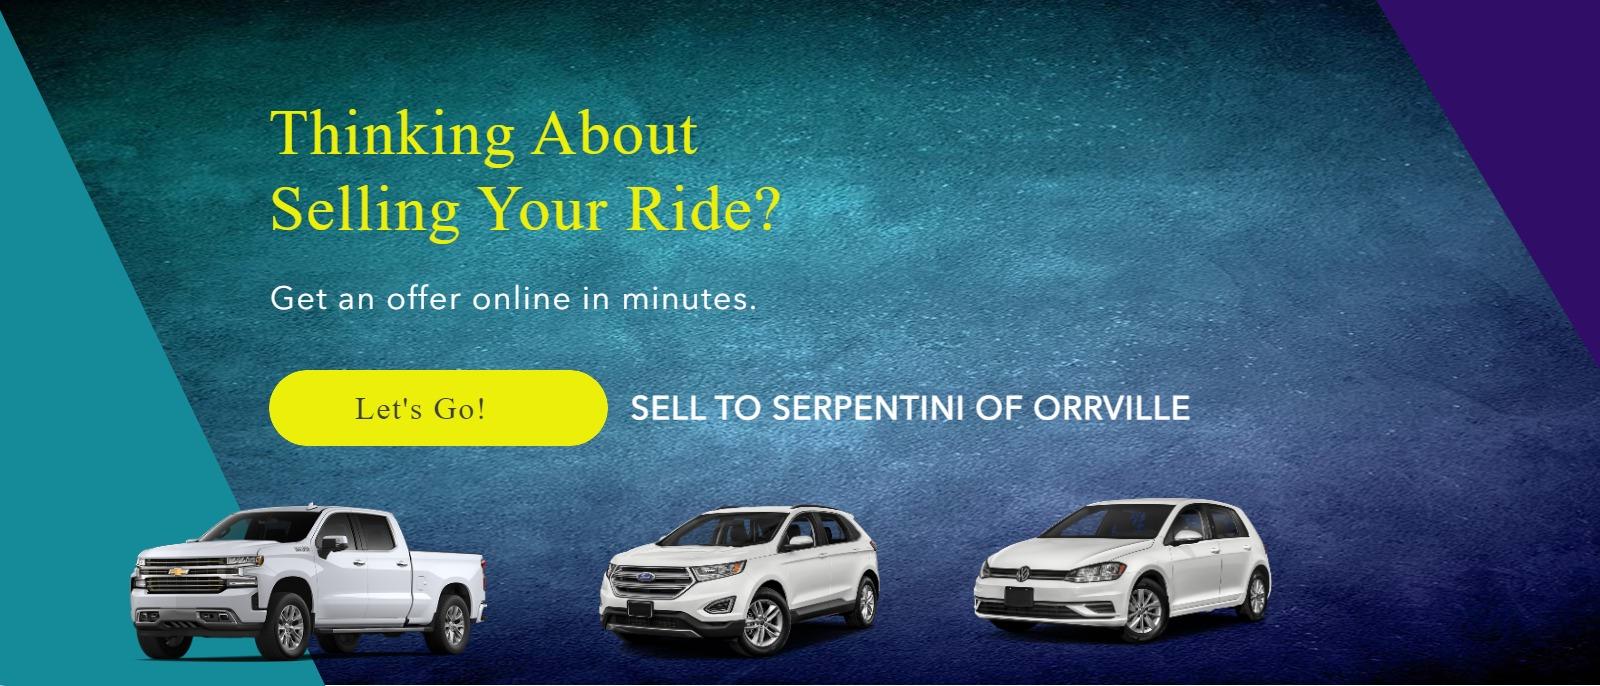 Sell Your Ride - Get an offer online in minutes!